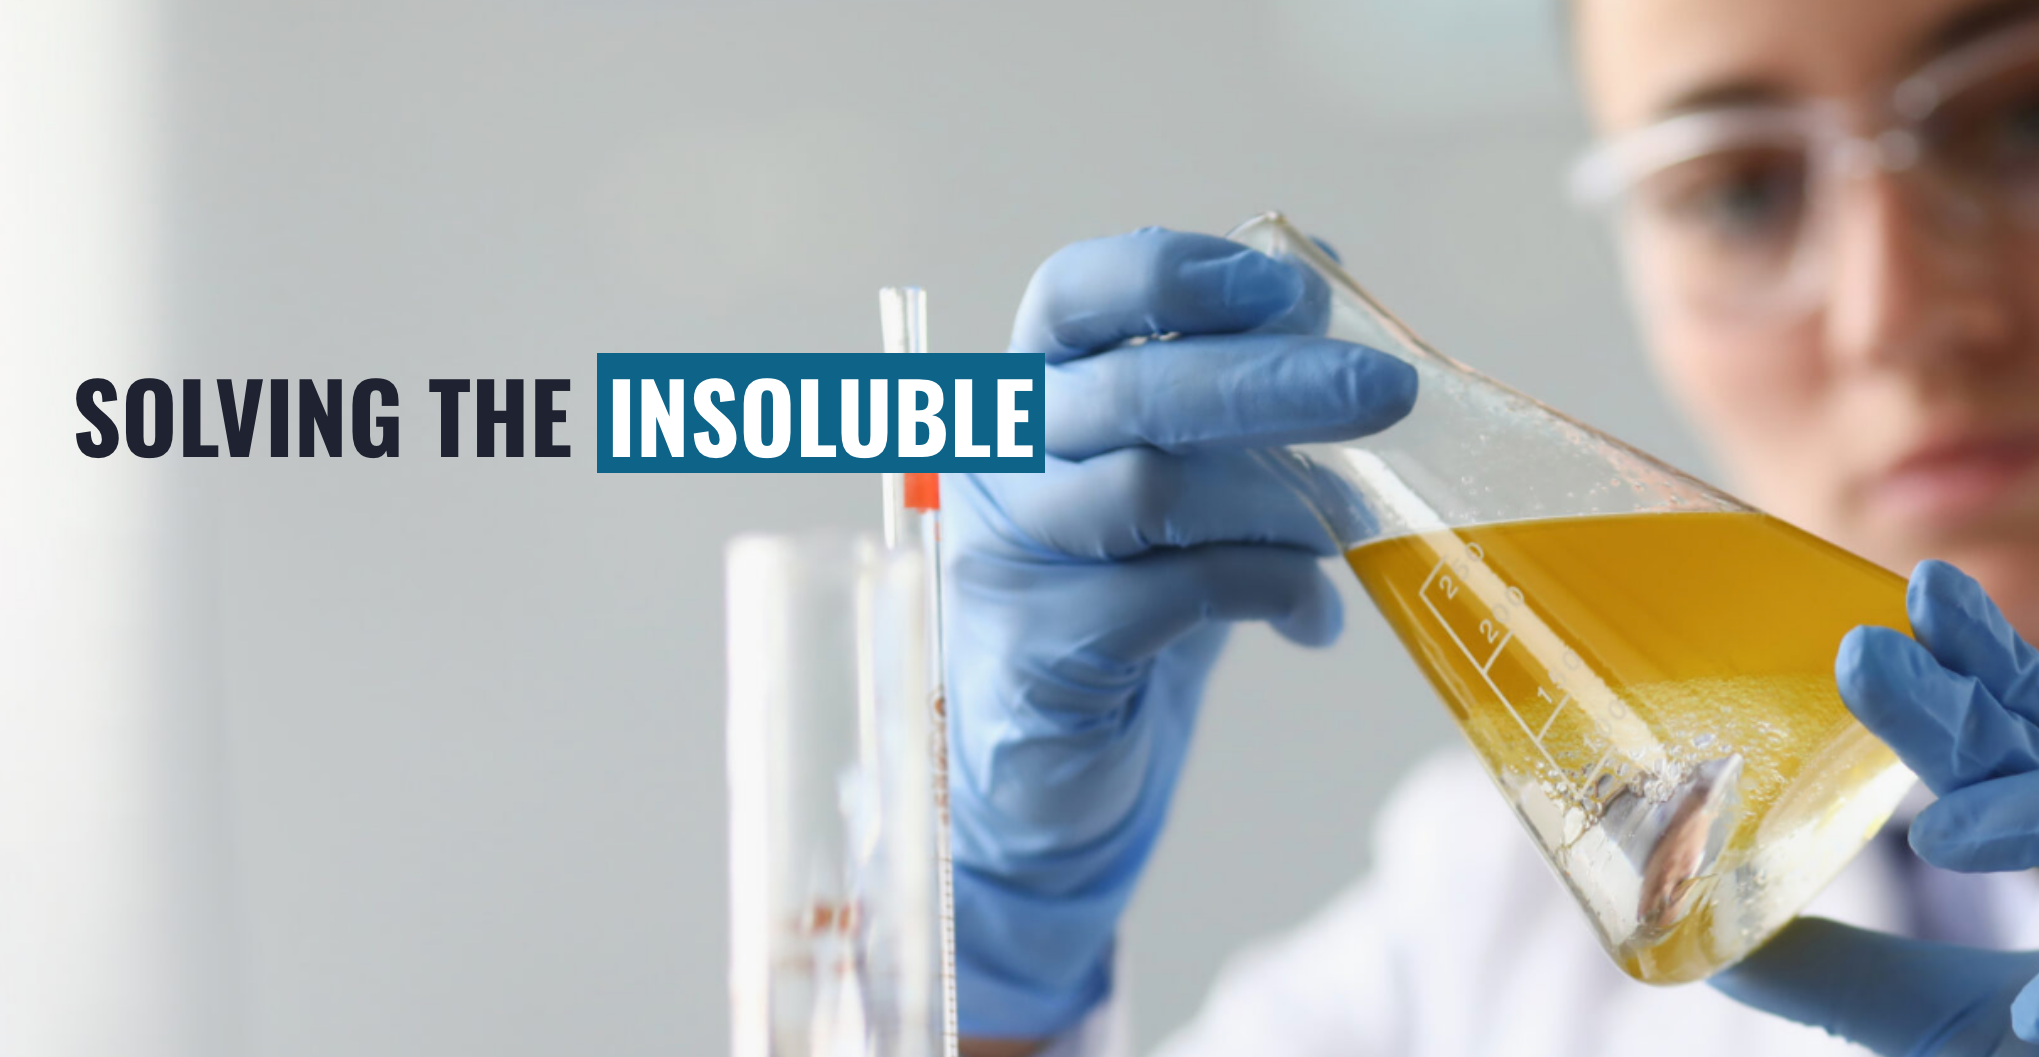 Solving The Insoluble: How One Company's Patented Tech Can Make CBD, Pharma Drugs And Nutraceuticals Water-Soluble